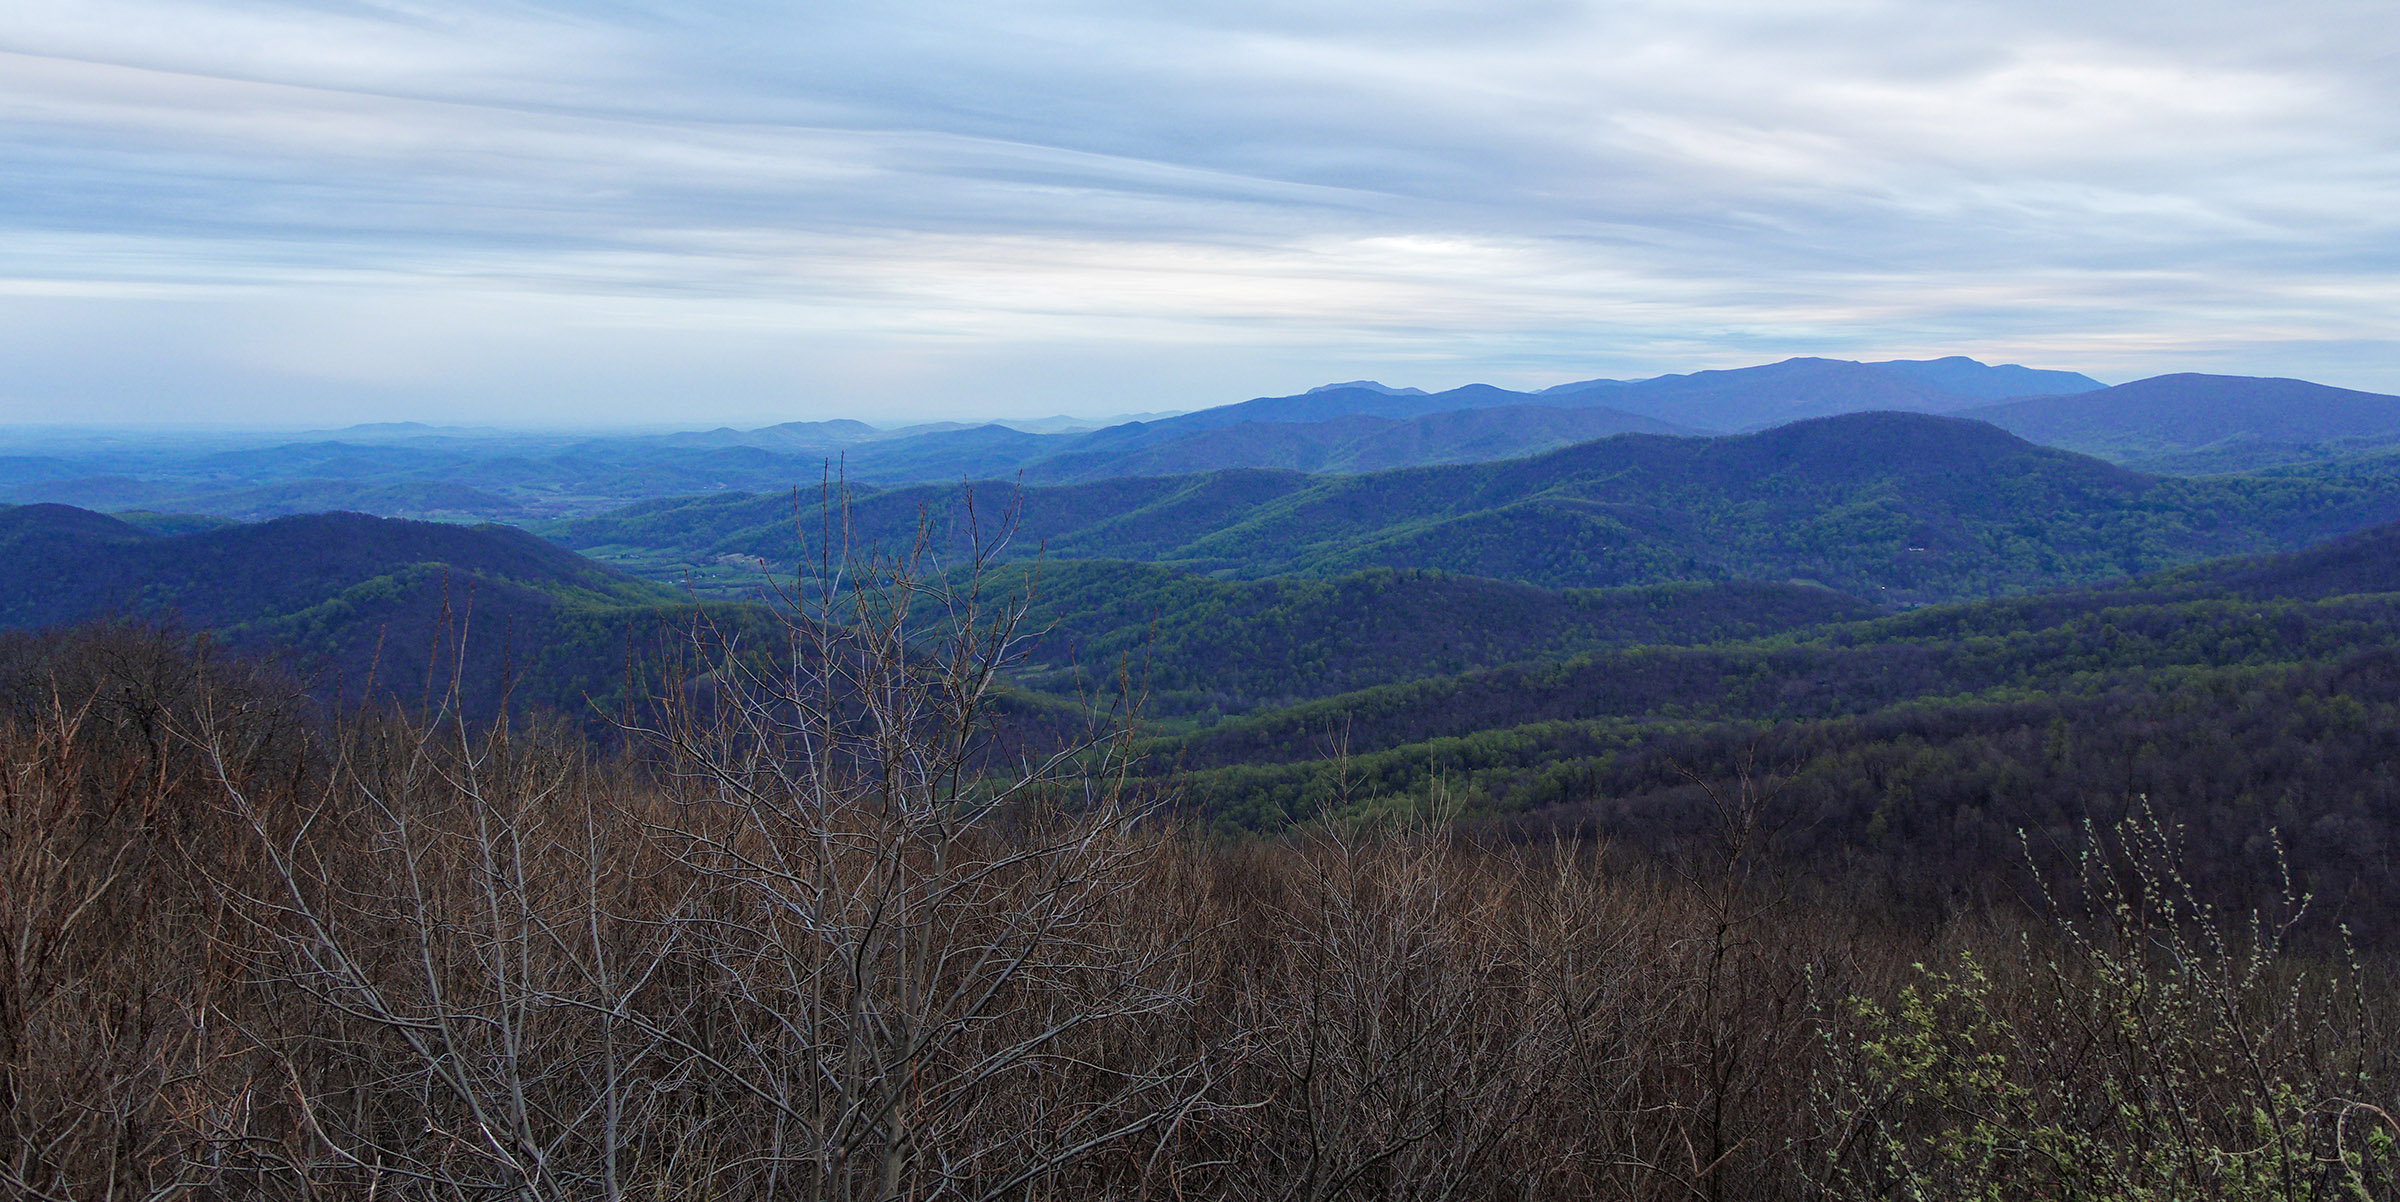 View of Blue Ridge Mountains from Range View Overlook